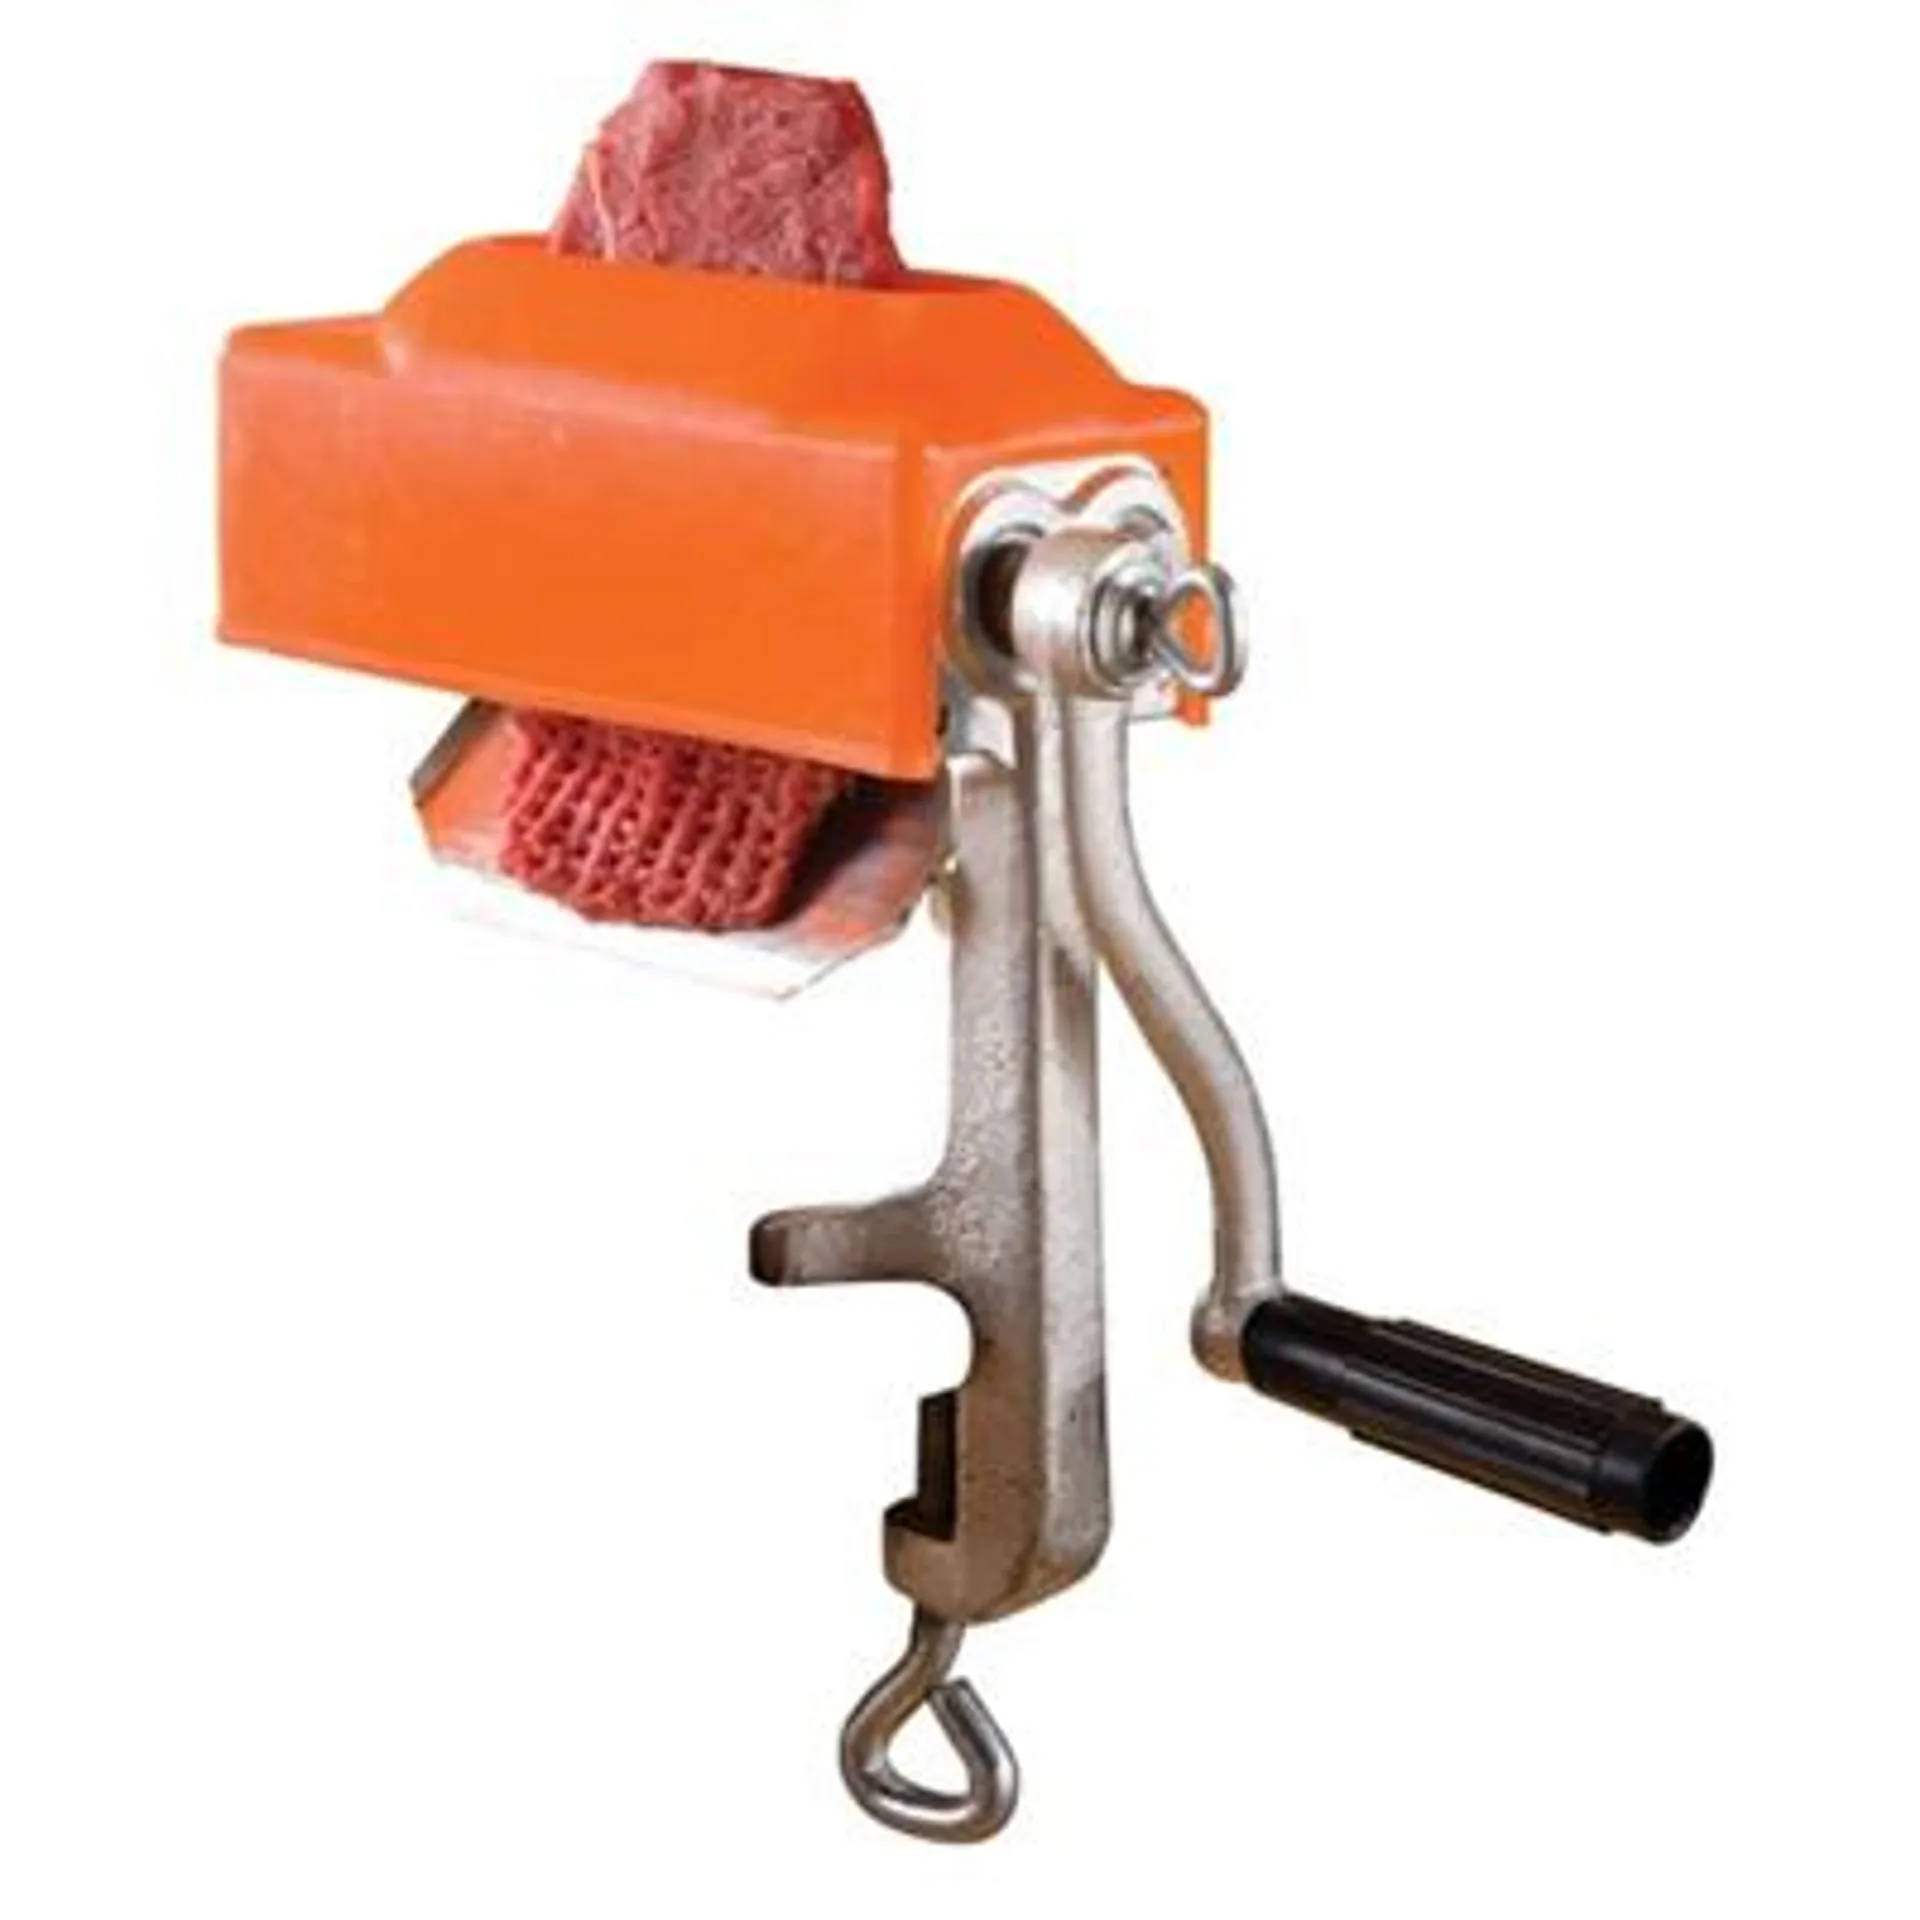 Clamp-On Meat Tenderizer